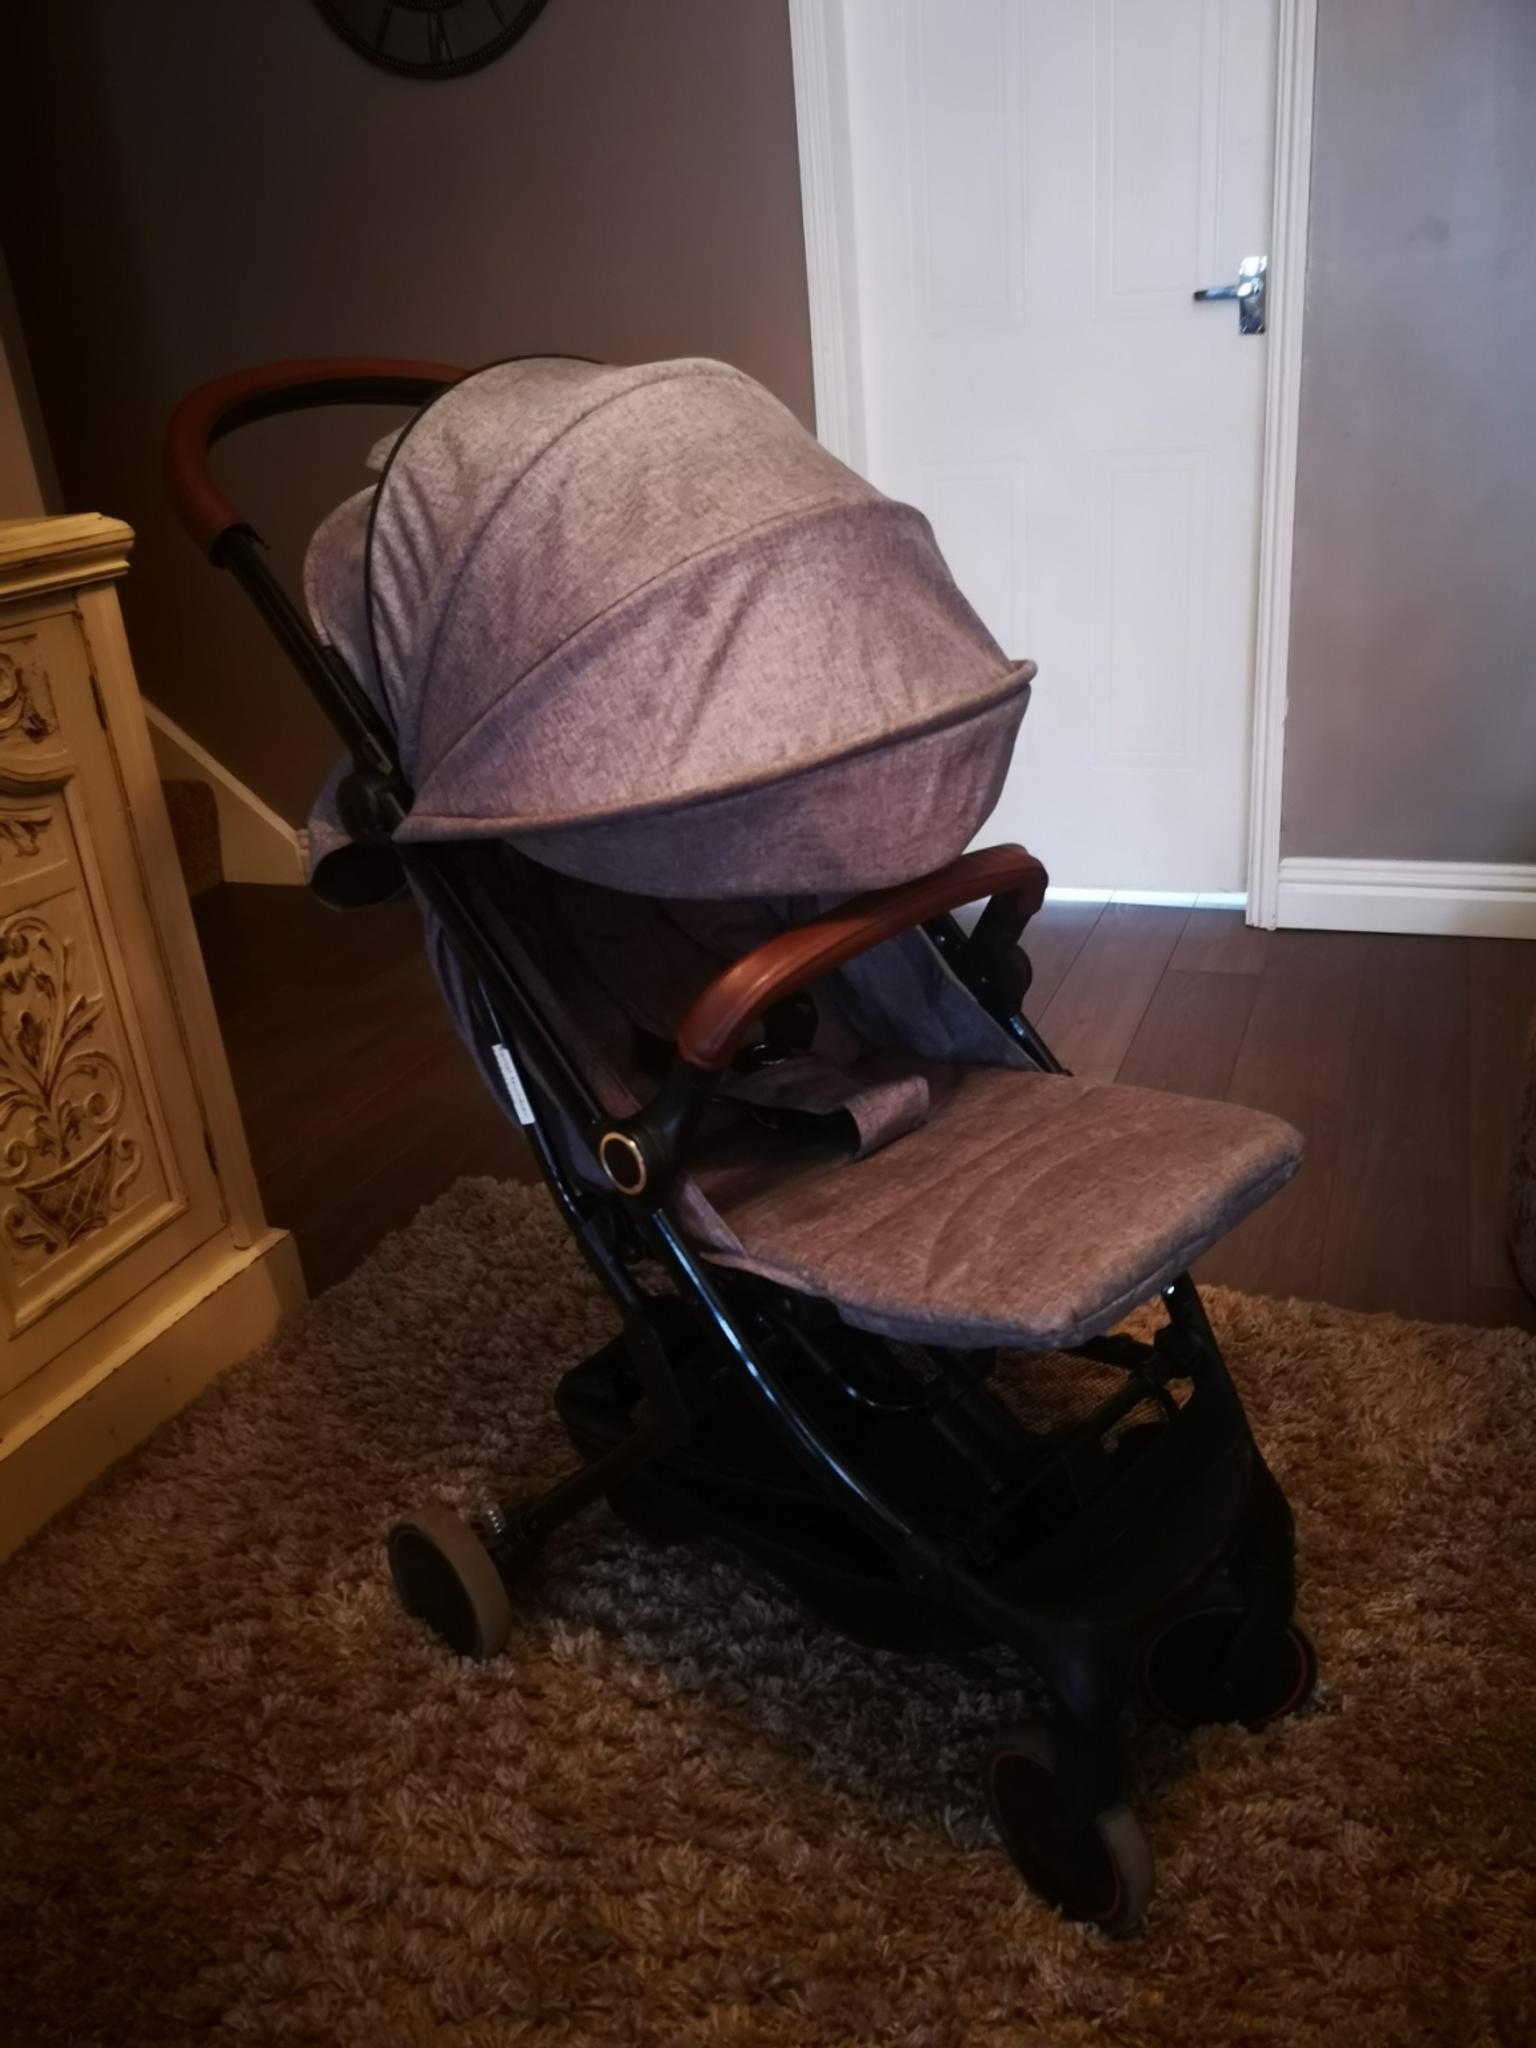 stroller for a 1 year old